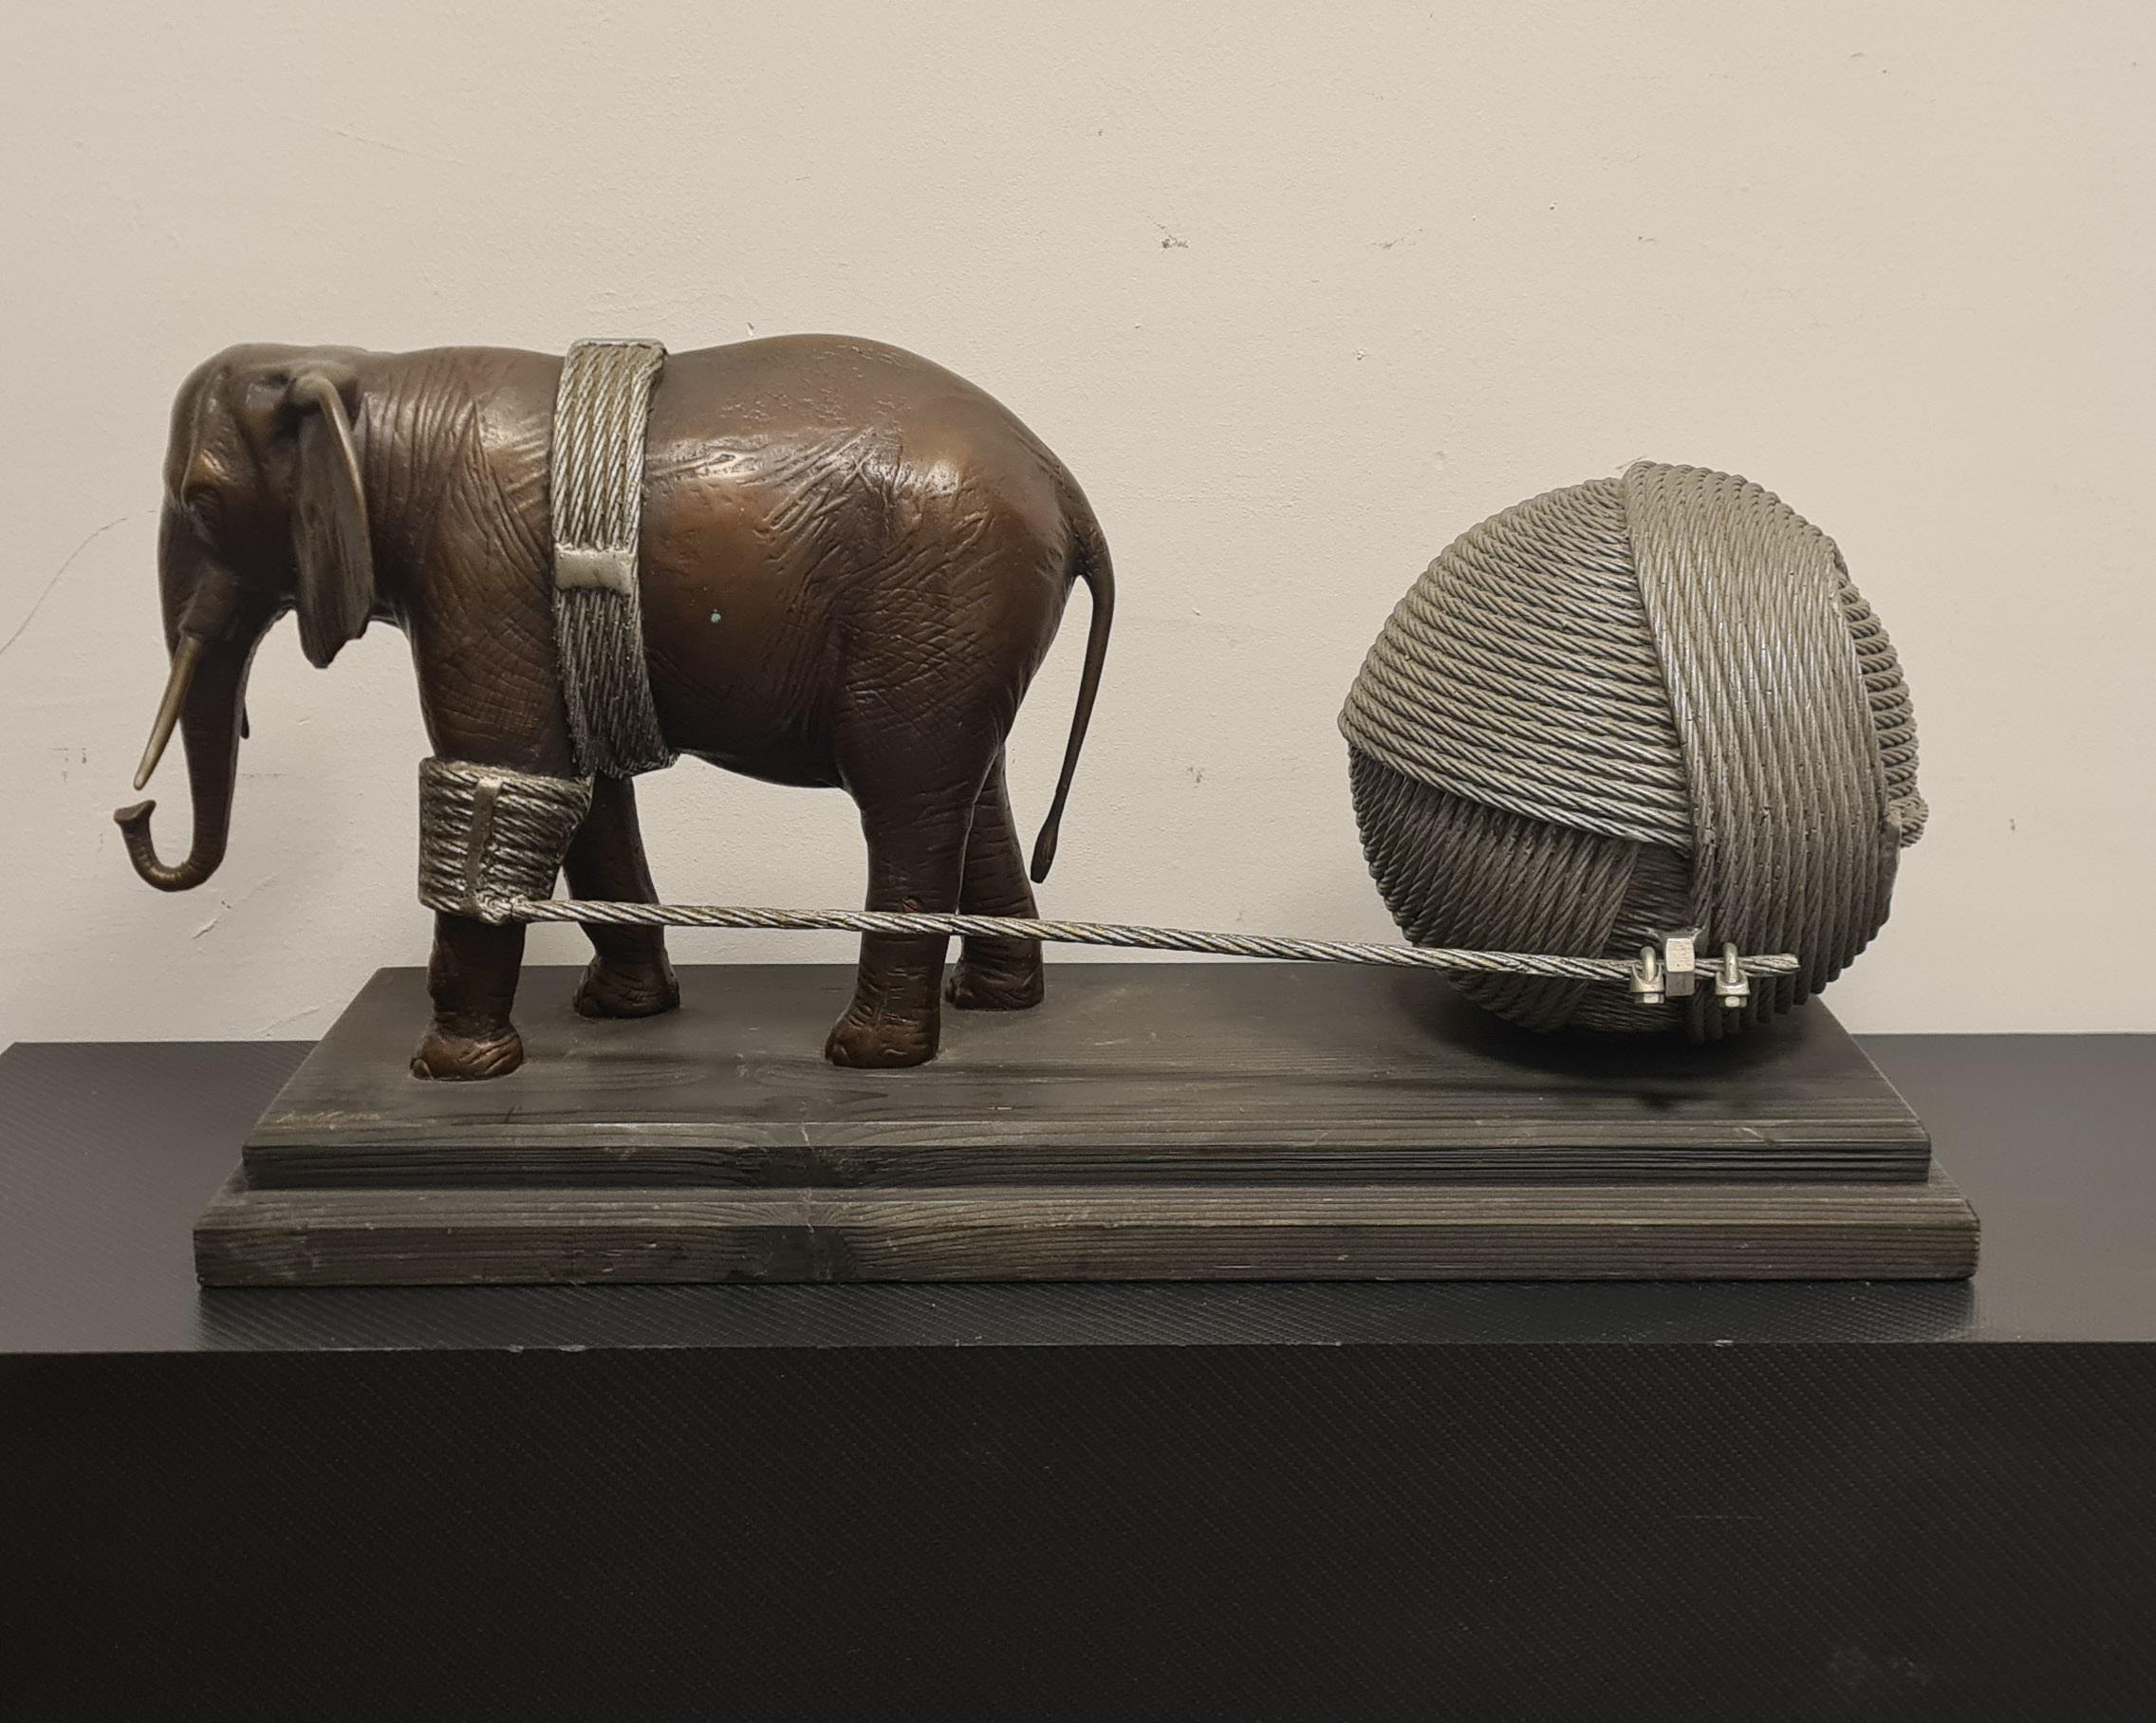 Sculpture by master Valeriano Trubbiani.

The sculpture depicts an Elephant made of bronze pulling a huge aluminum ball to which it is chained.

In this work, the artist's intention to use his art as a means of denouncing injustice comes through